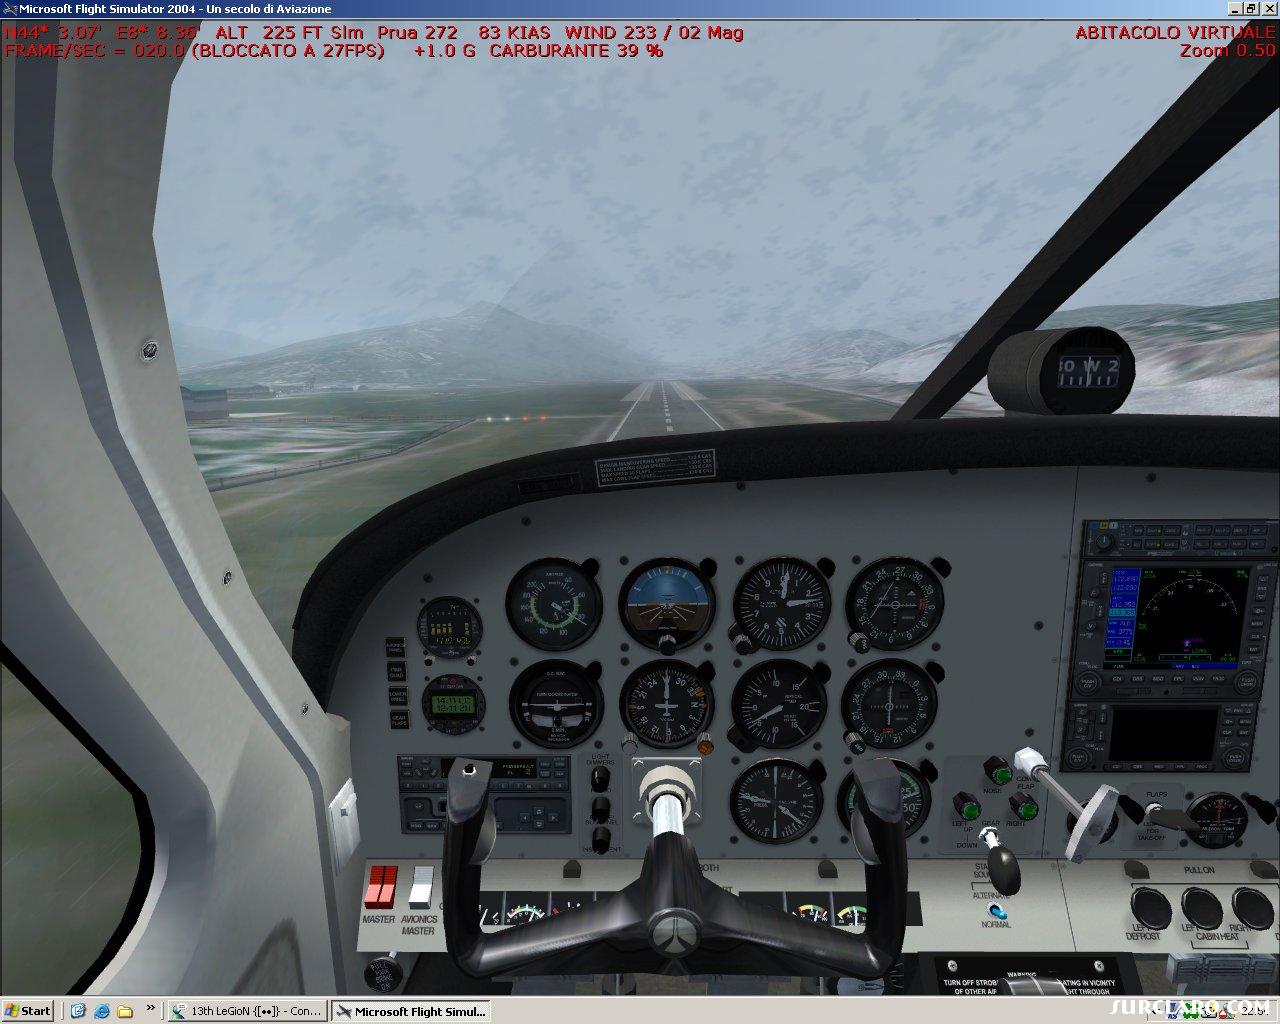 Rockwell Commander 112A on short final at Albegna LIMG - Photo 15460